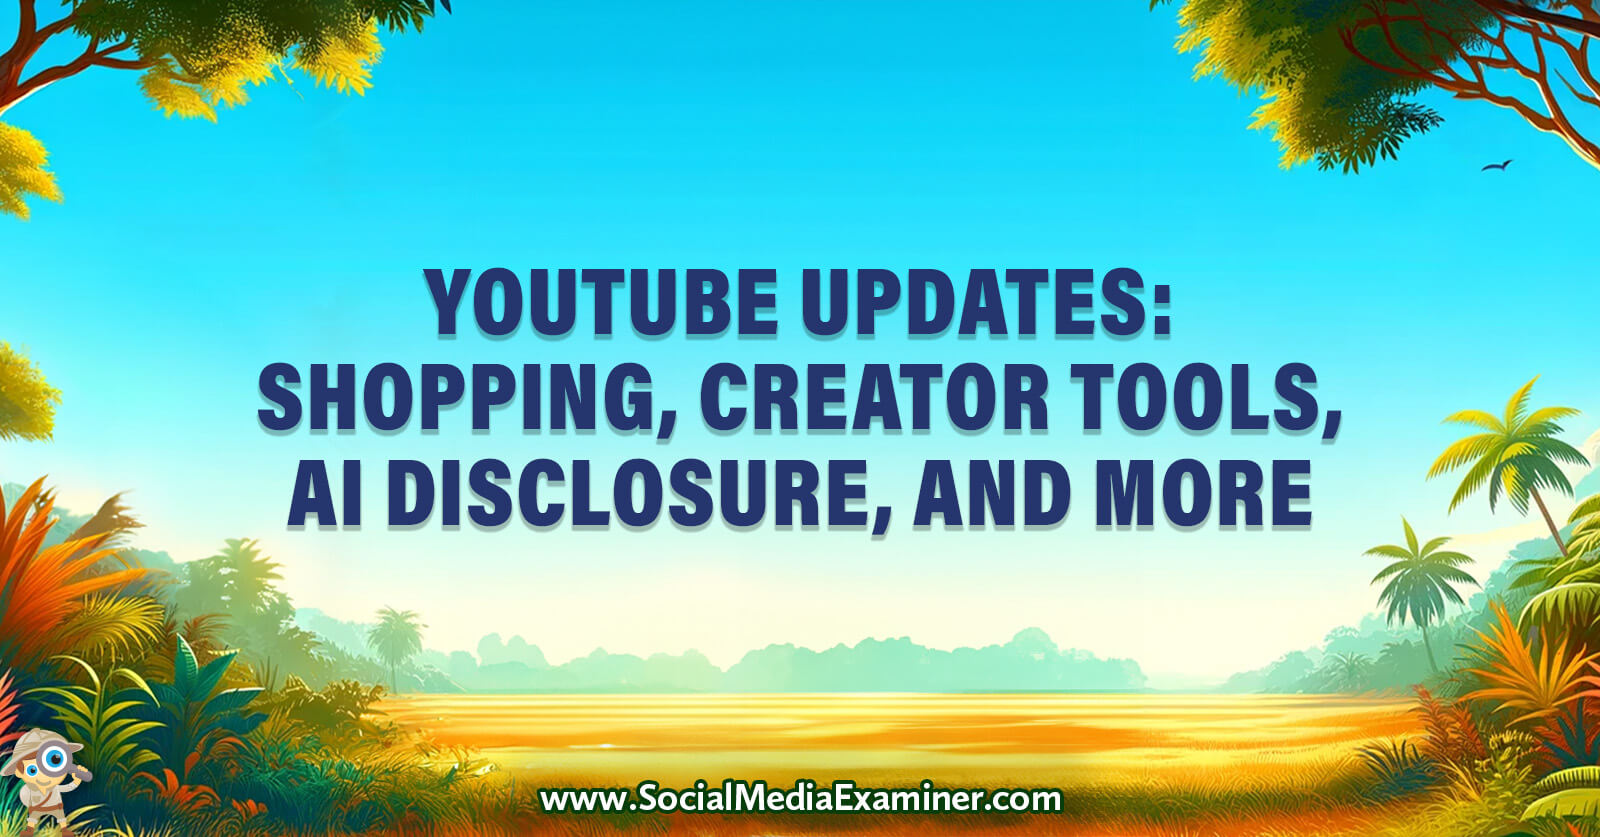 YouTube Updates: Shopping Features, Creator Tools, AI Disclosure, and More by Social Media Examiner